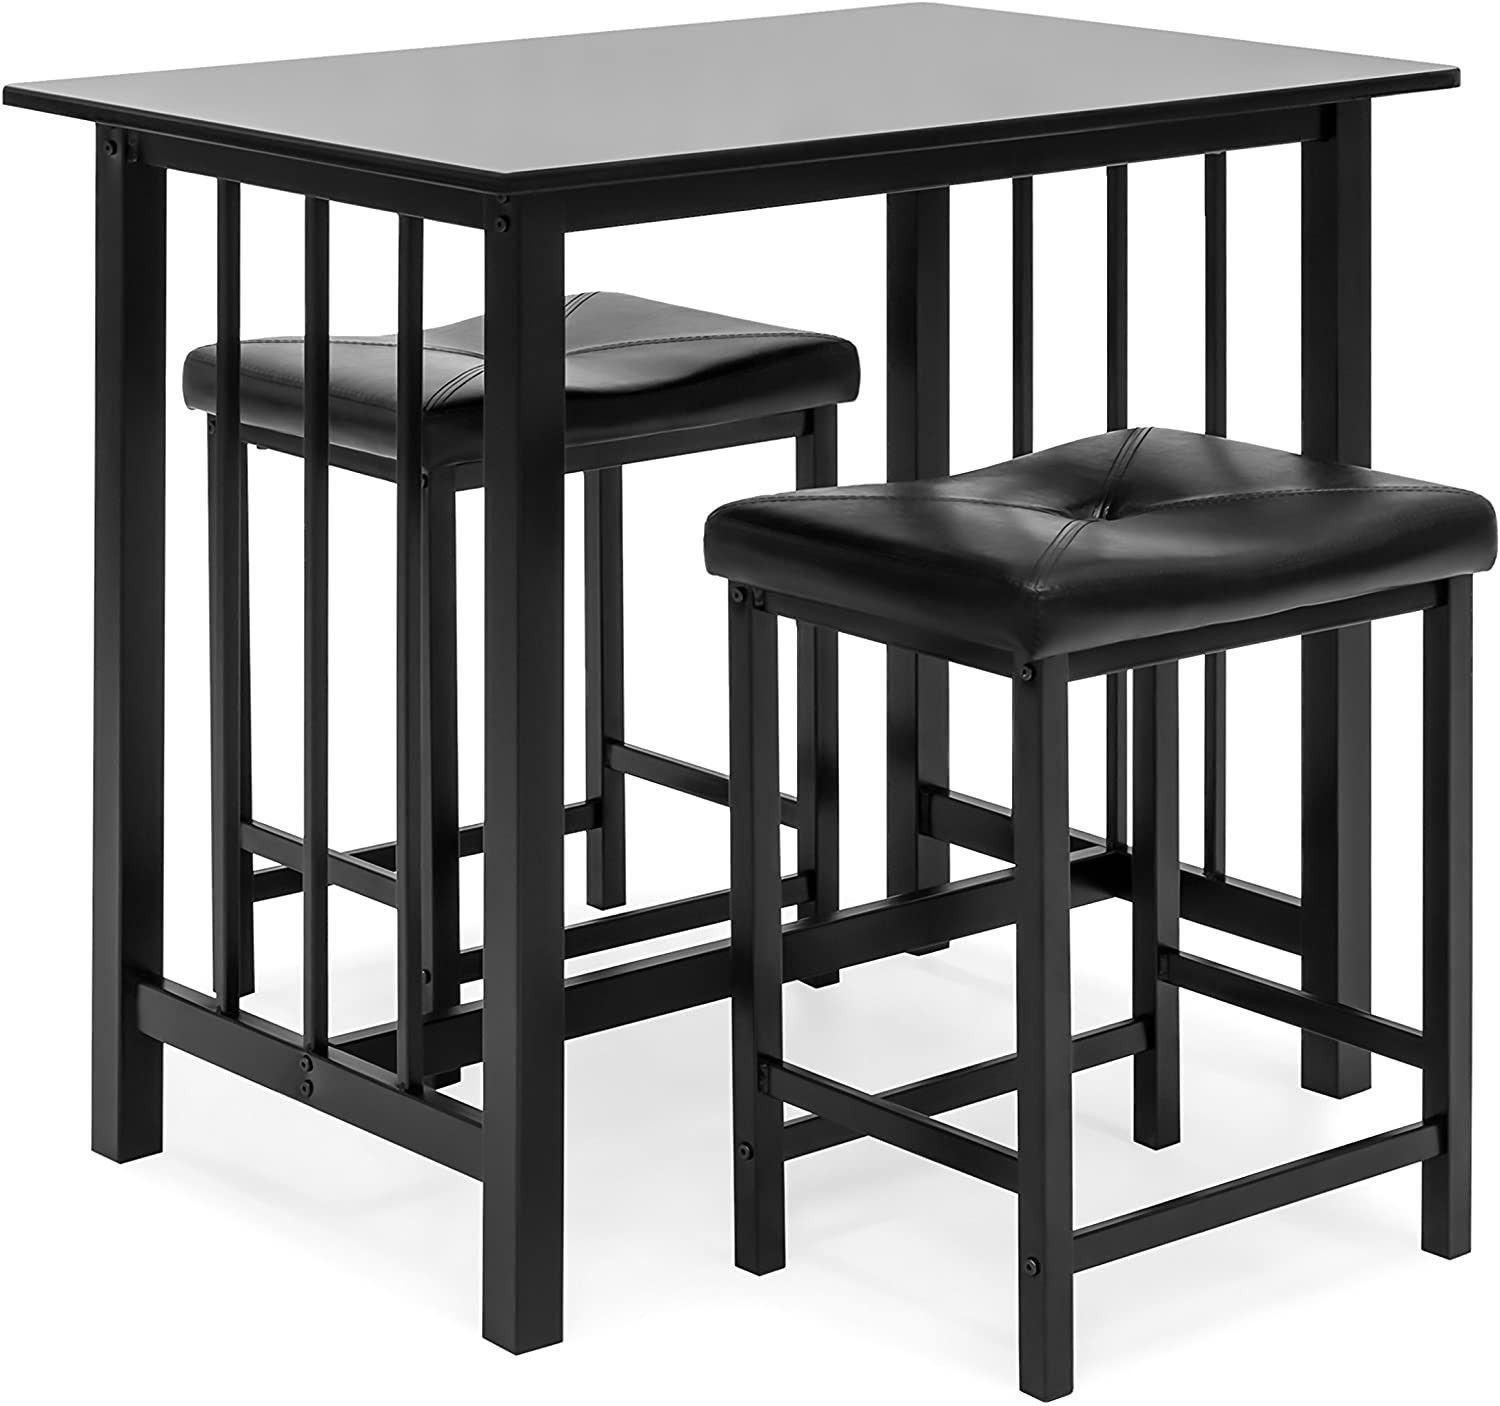 Set of 3 - Counter Height Dining Table with 2 Leather Stools, Black